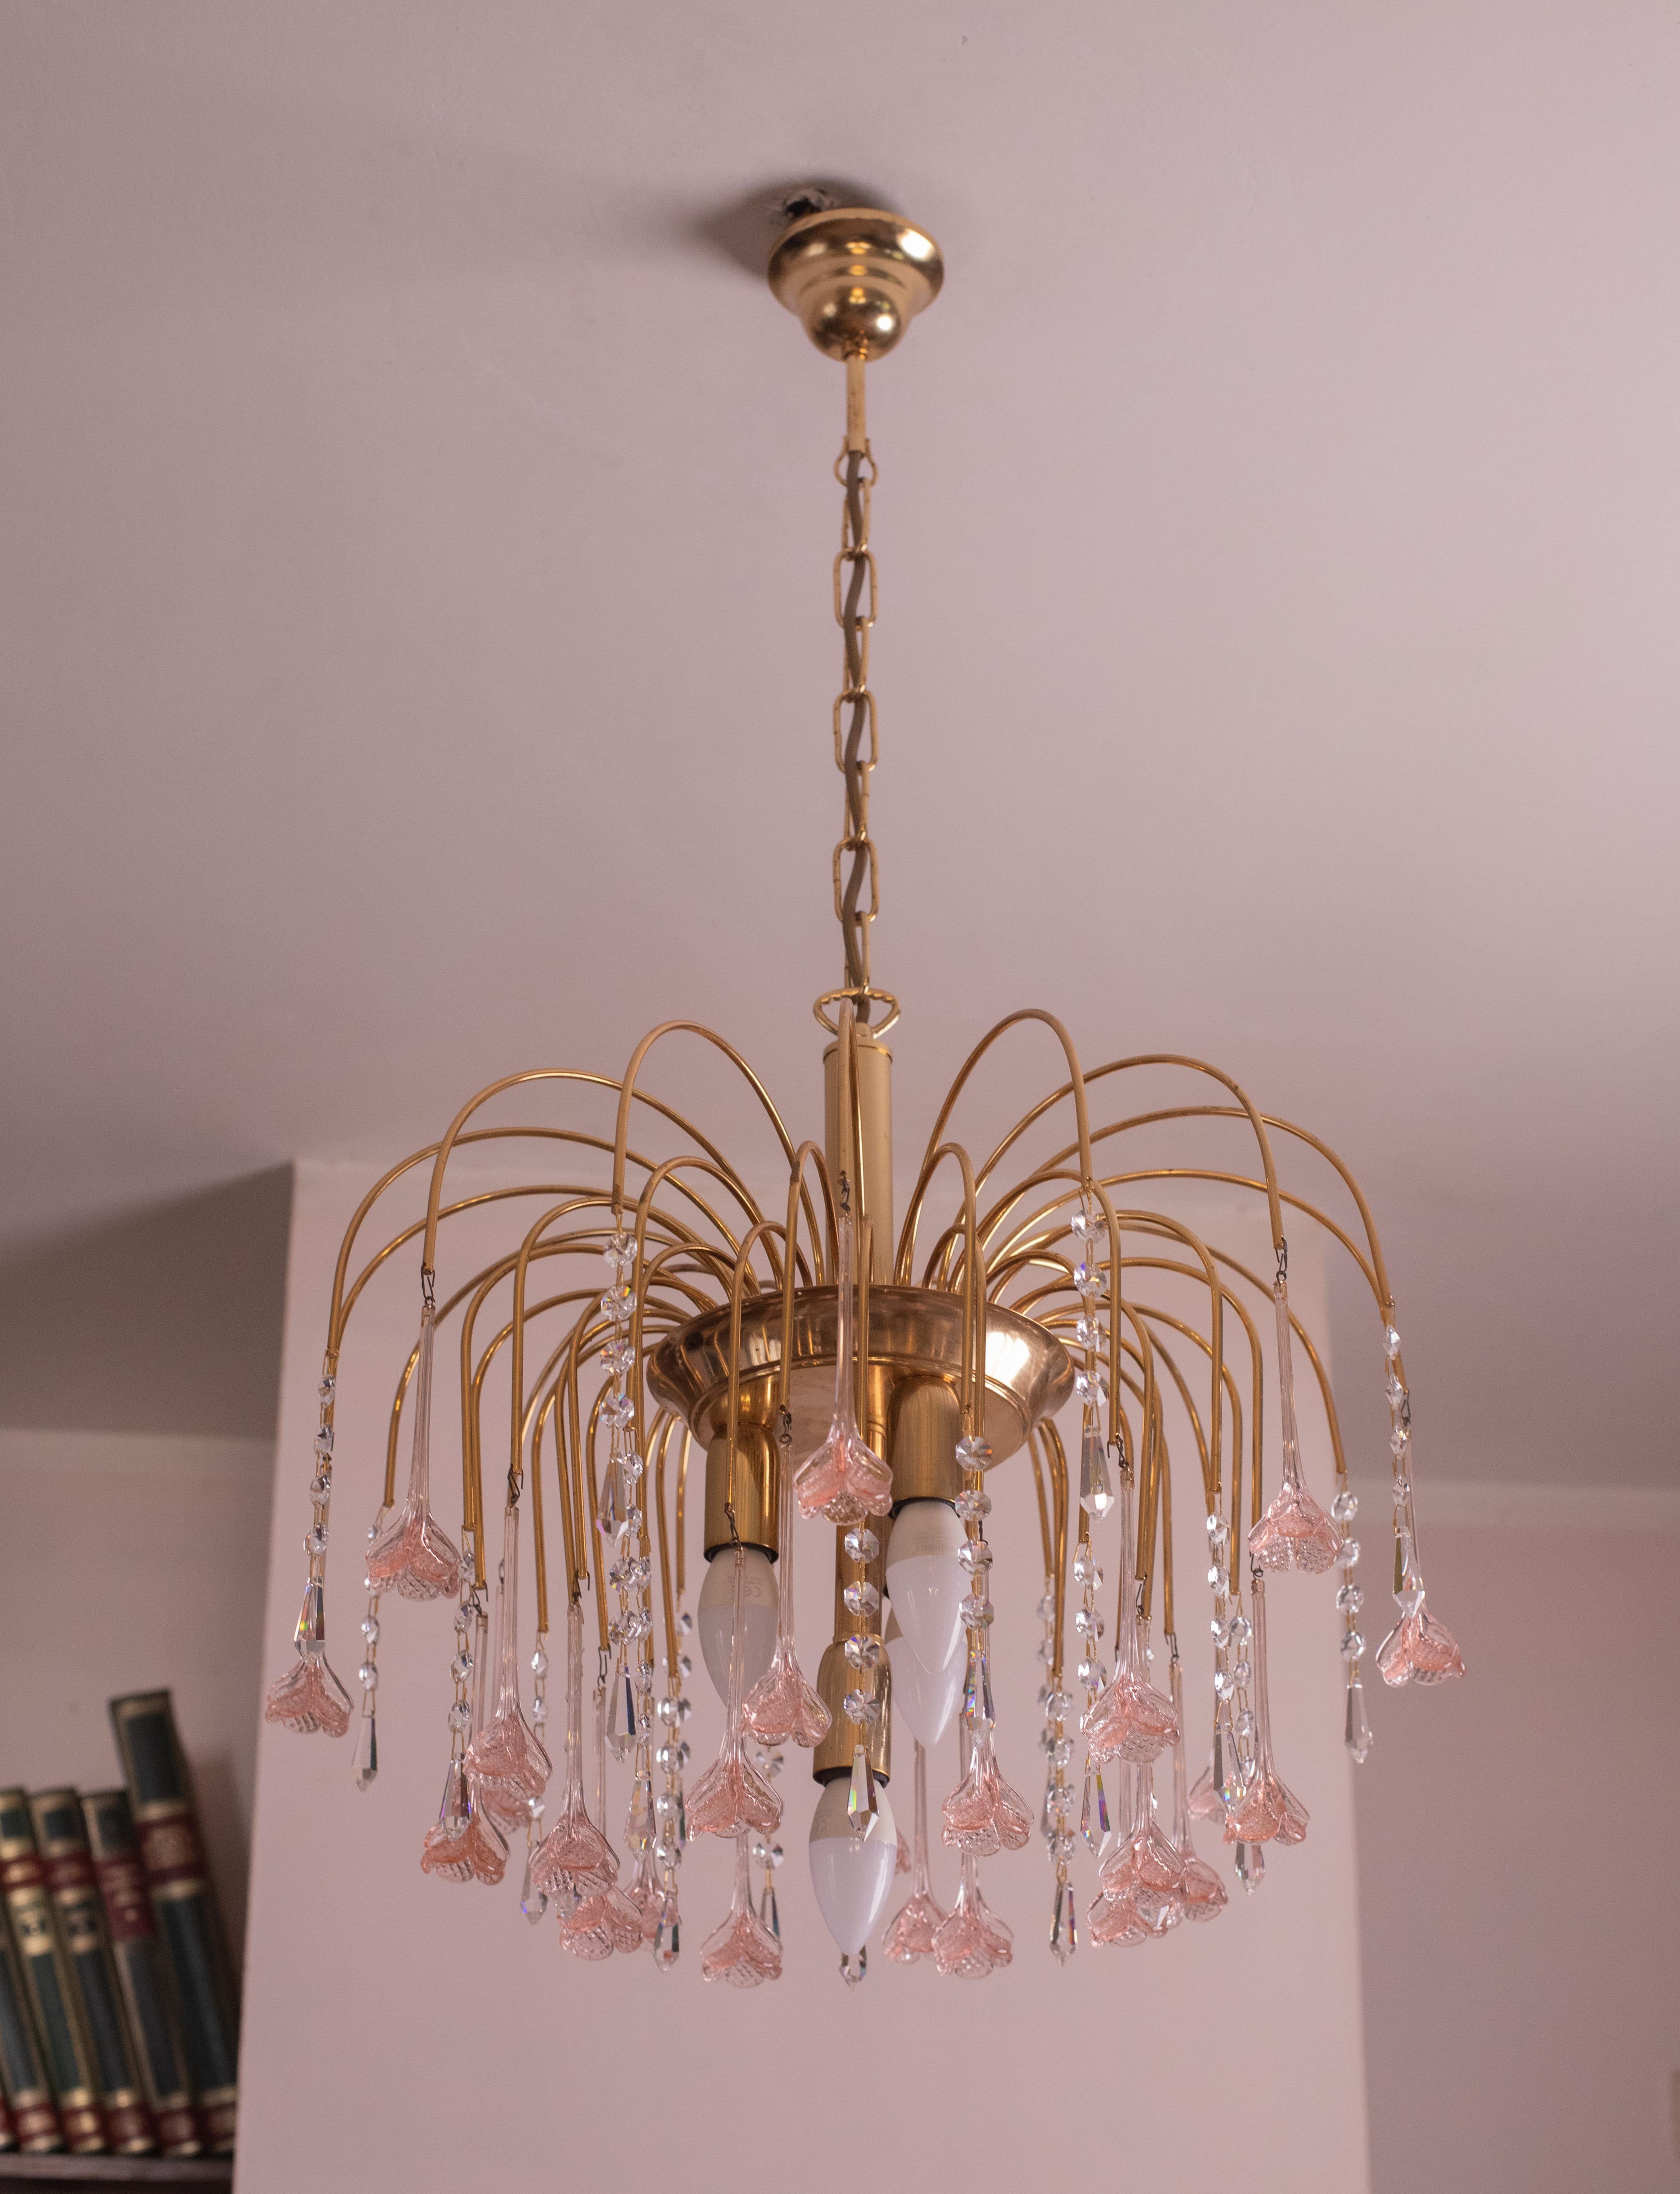 Murano chandelier with pink flowers in Hollywood Regency style. This beautiful luxury Murano glass chandelier is a design in the style of Paolo Venini. With its romantic glass flowers, it is truly a joy to behold. The chandelier consists of three